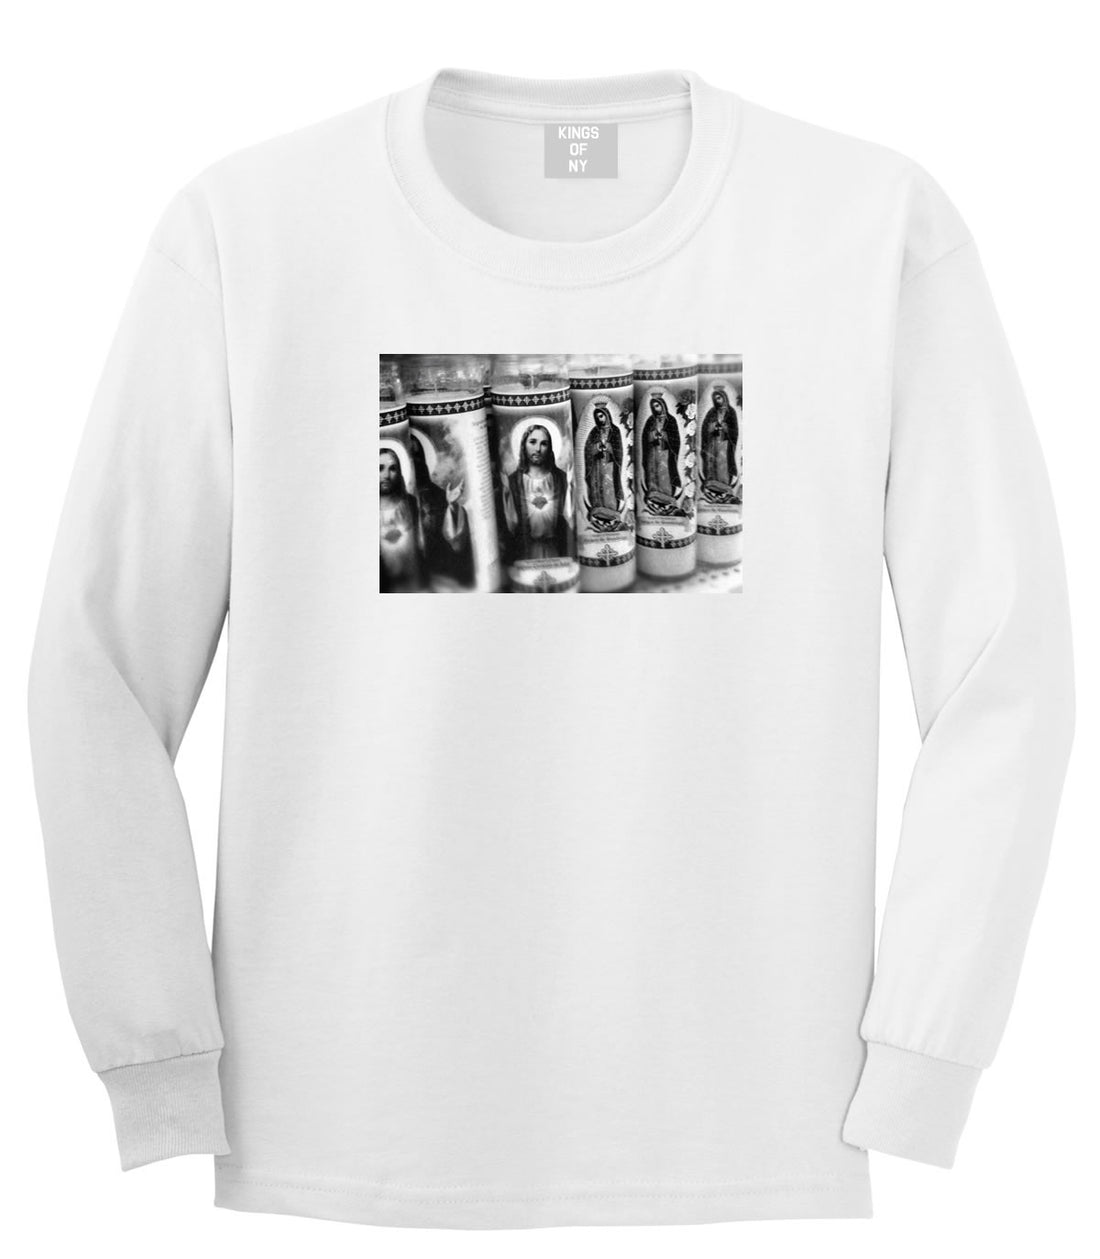 Candles Religious God Jesus Mary Fire NYC Long Sleeve Boys Kids T-Shirt in White by Kings Of NY